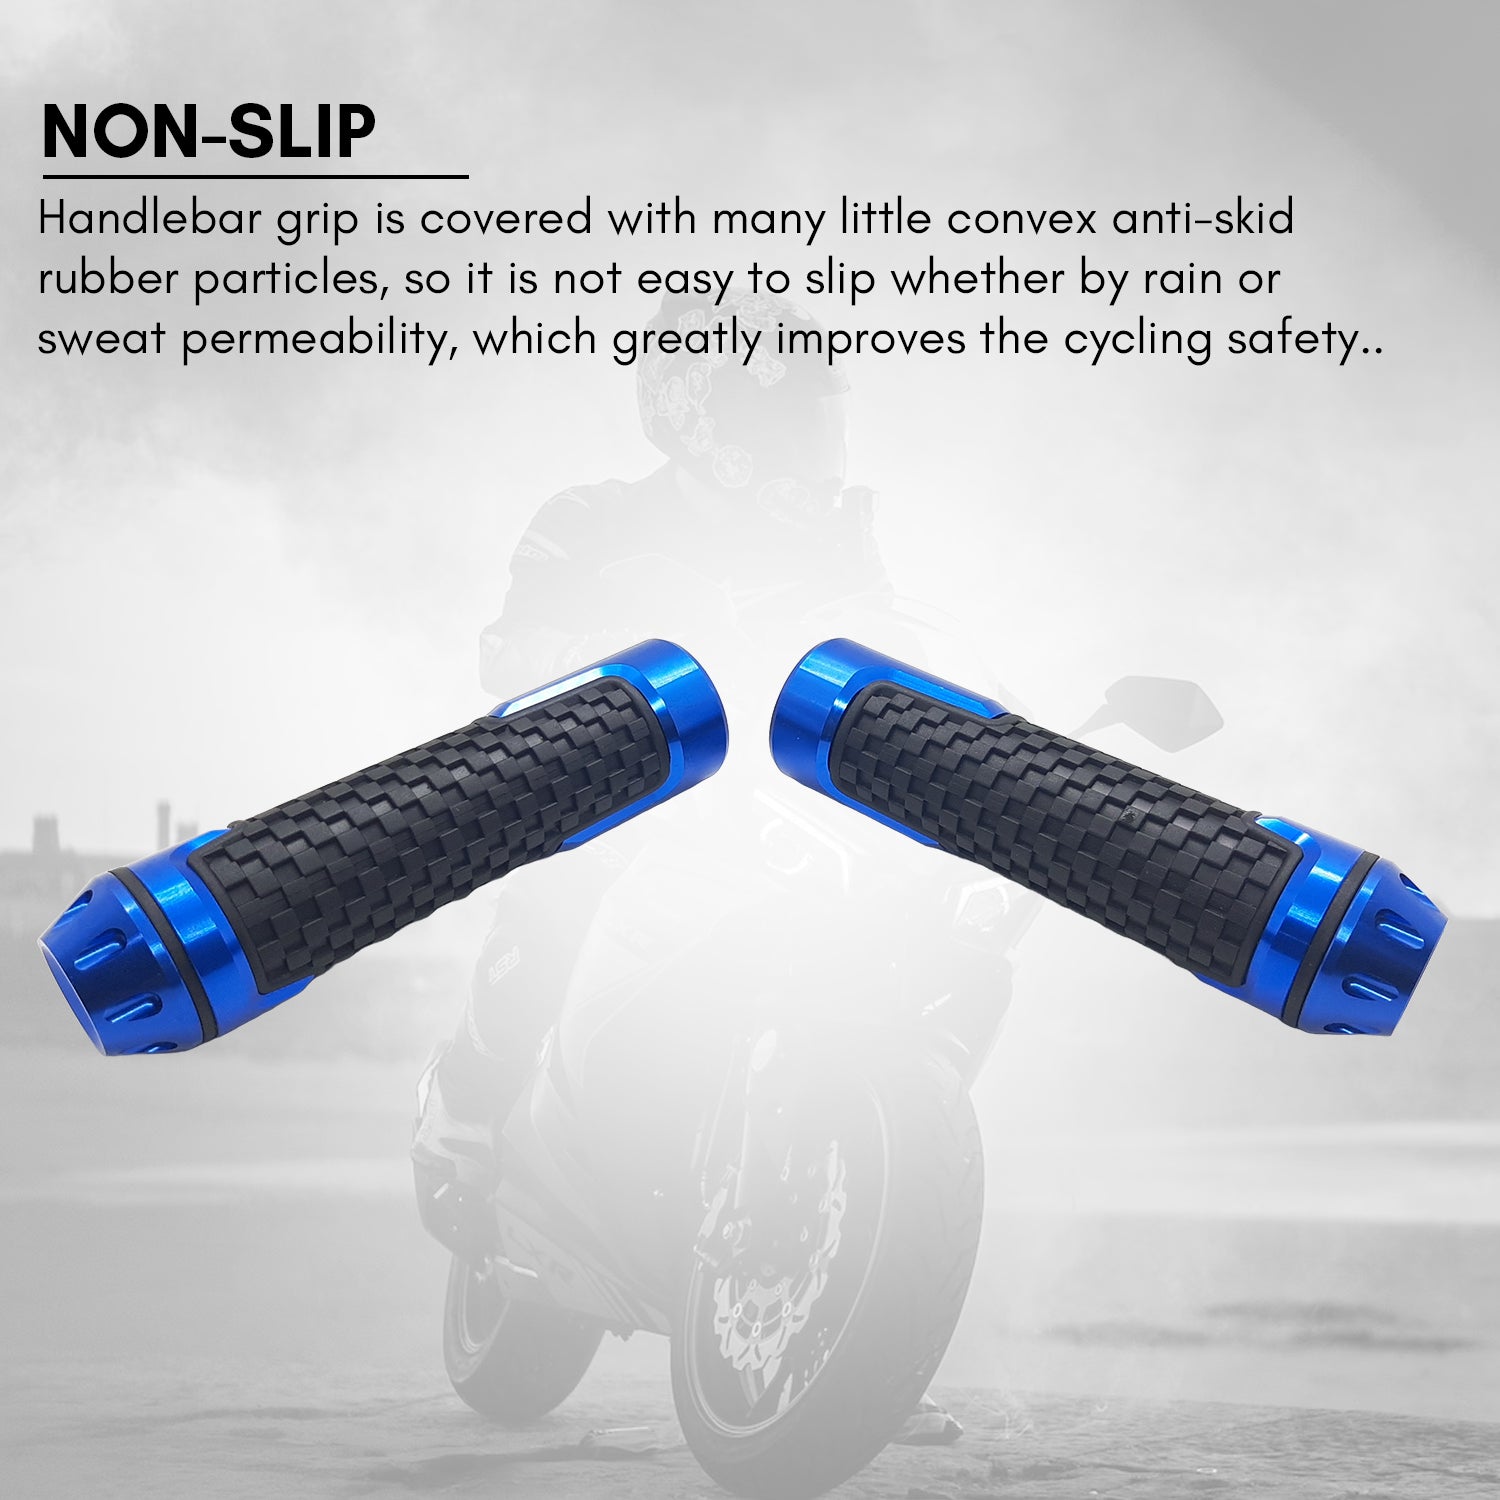 Aluminum and Rubber Motorcycle Grips Non Slip Universal High Strength Handlebar Grip Cover for Motorcycle (Pack of 2, Blue)